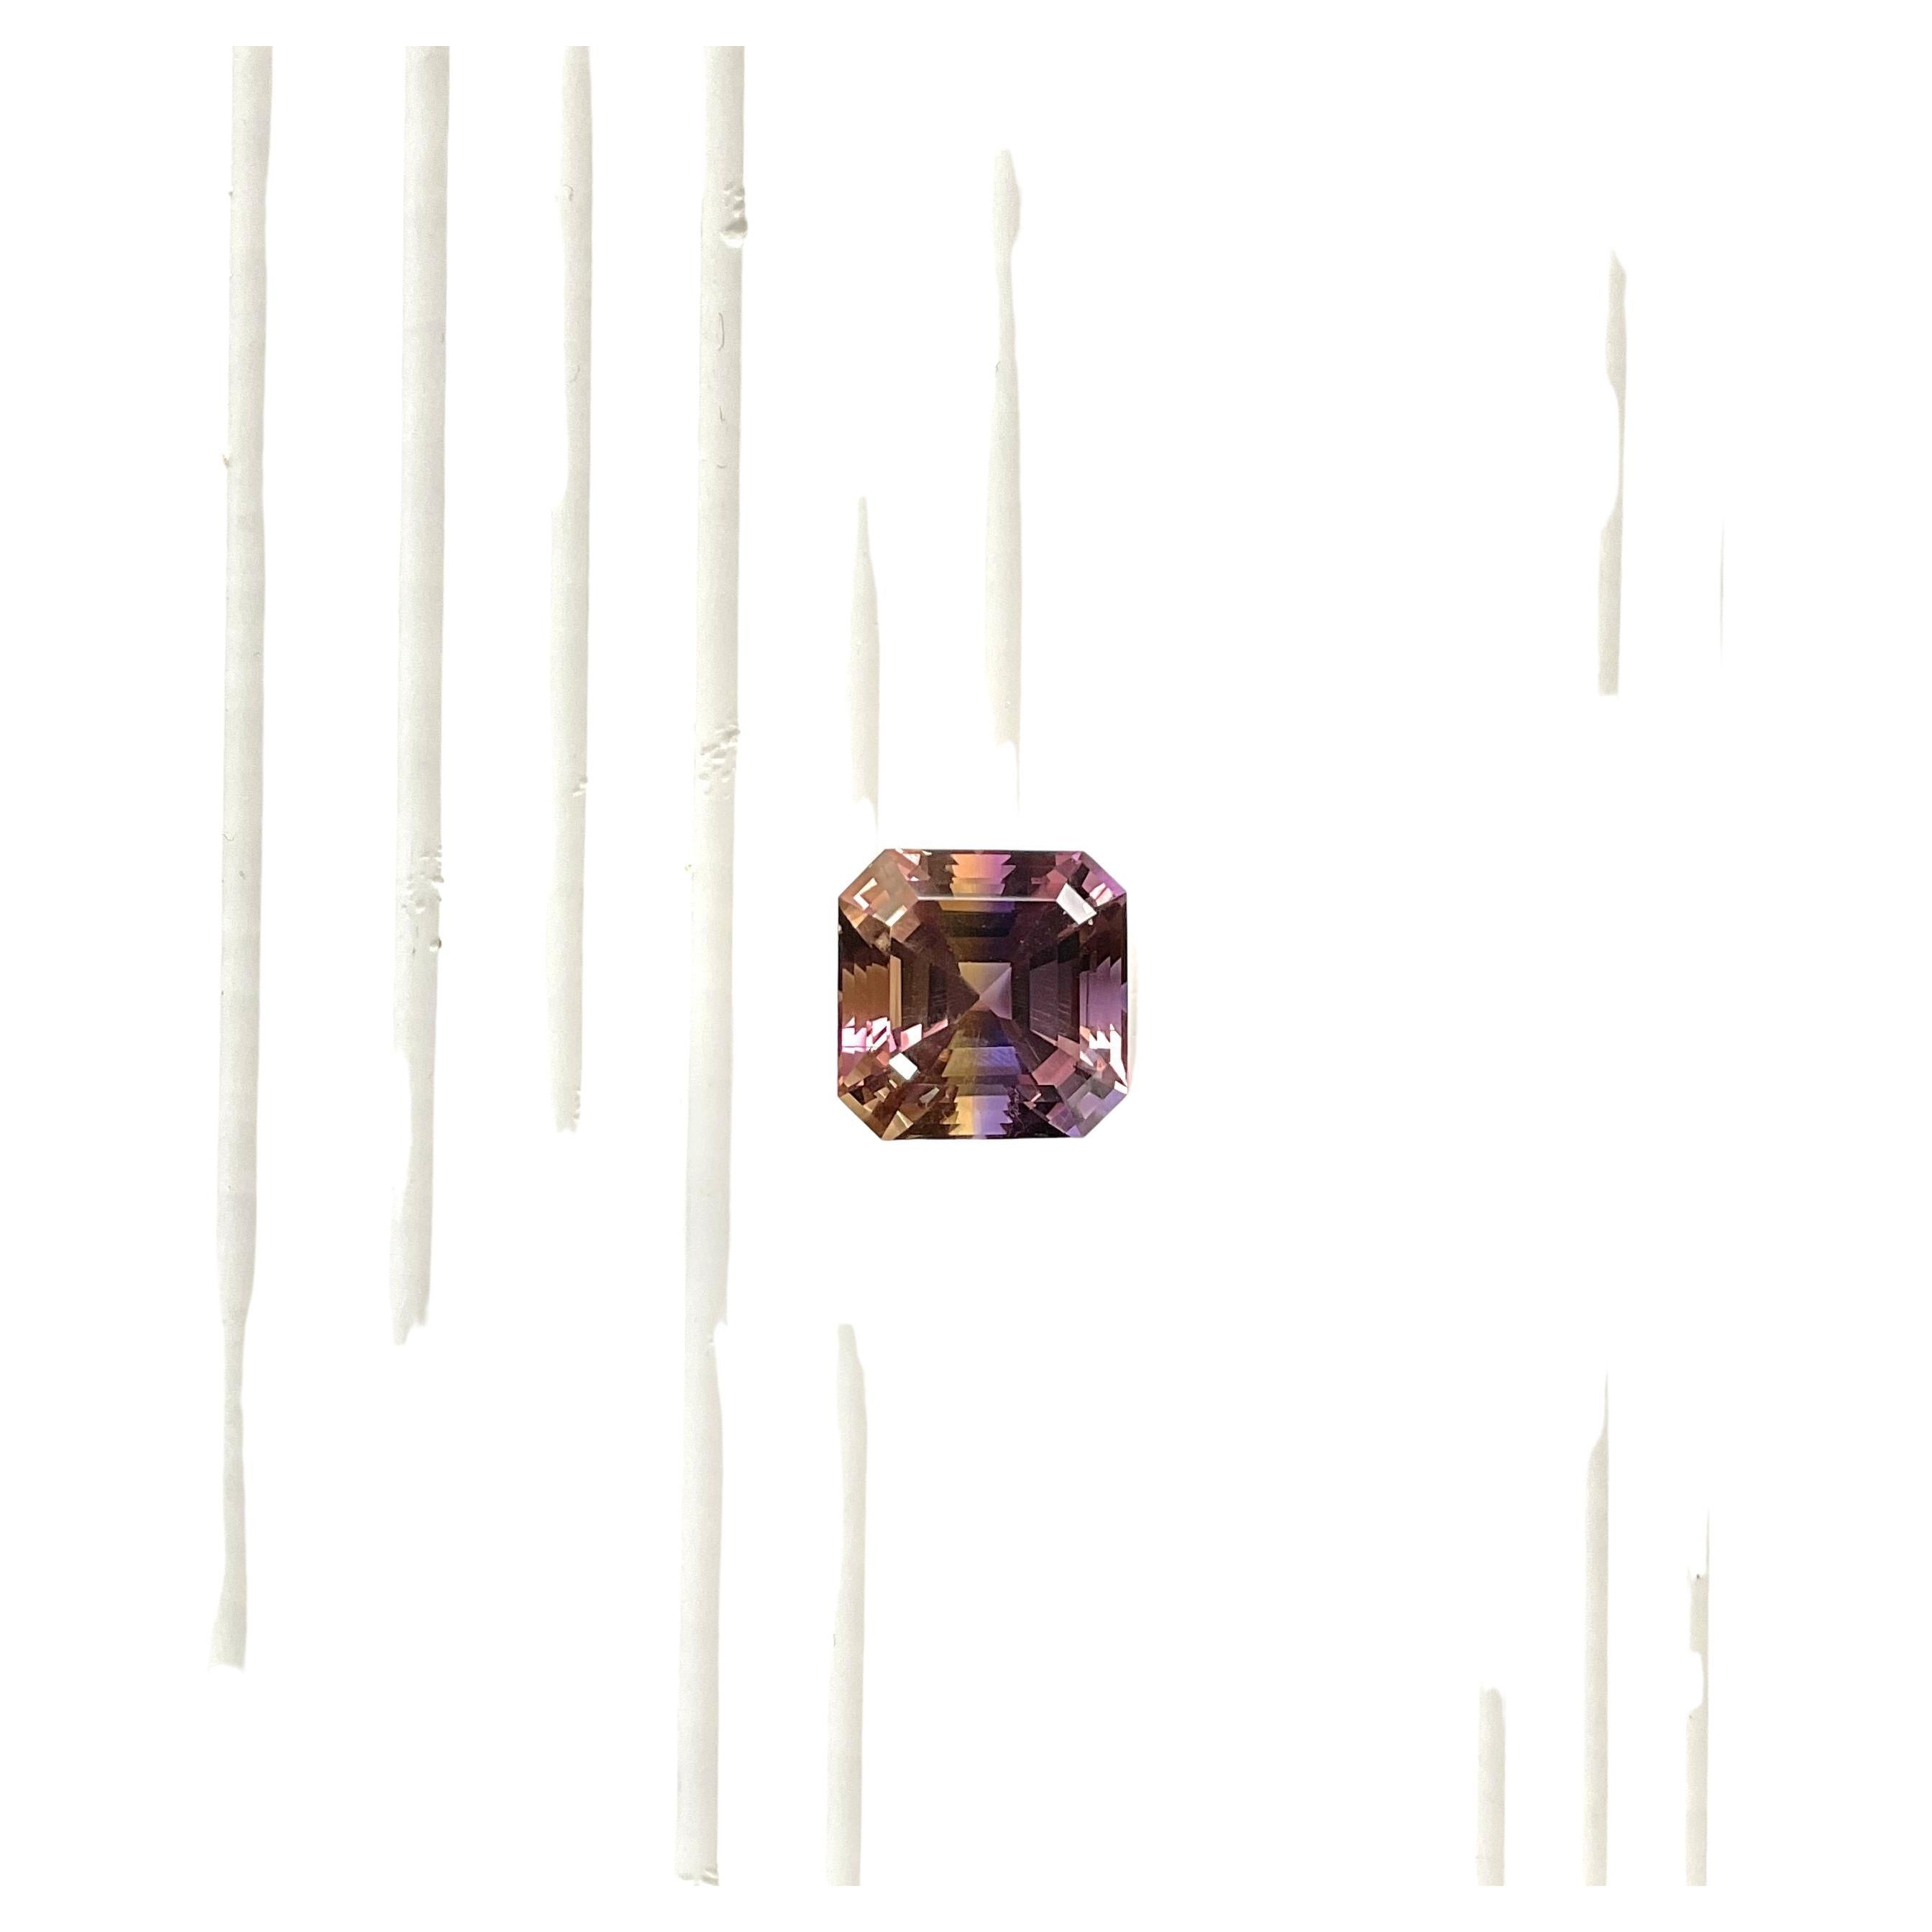 Gemstone Natural Ametrine
Clarity : Loupe Clean
Shape : Radiant
Size : 15x15x12 mm
Weight : 17.30 Carats
Origin : Bolivia
Treatment : None
.